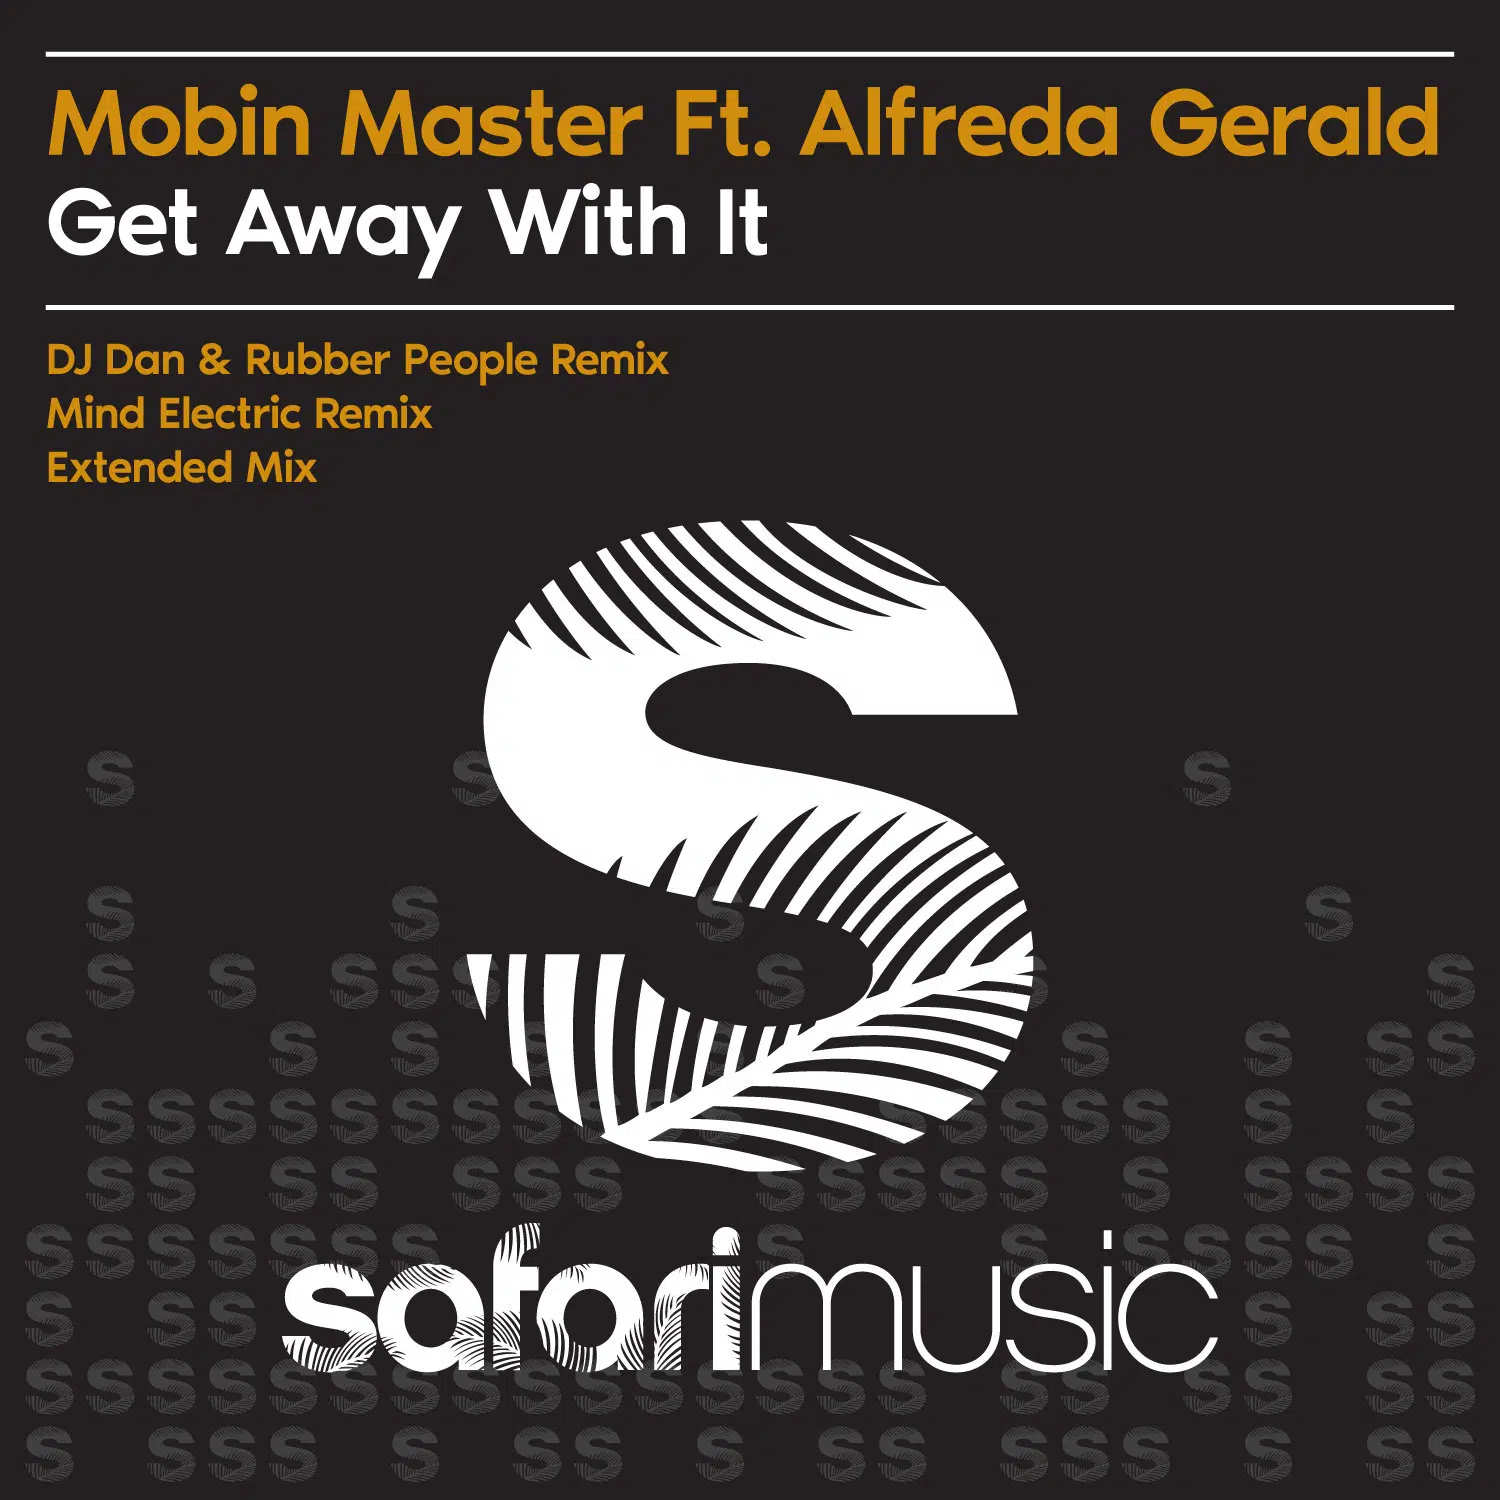 Mobin Master ft Alfreda Gerald “Get Away With It”